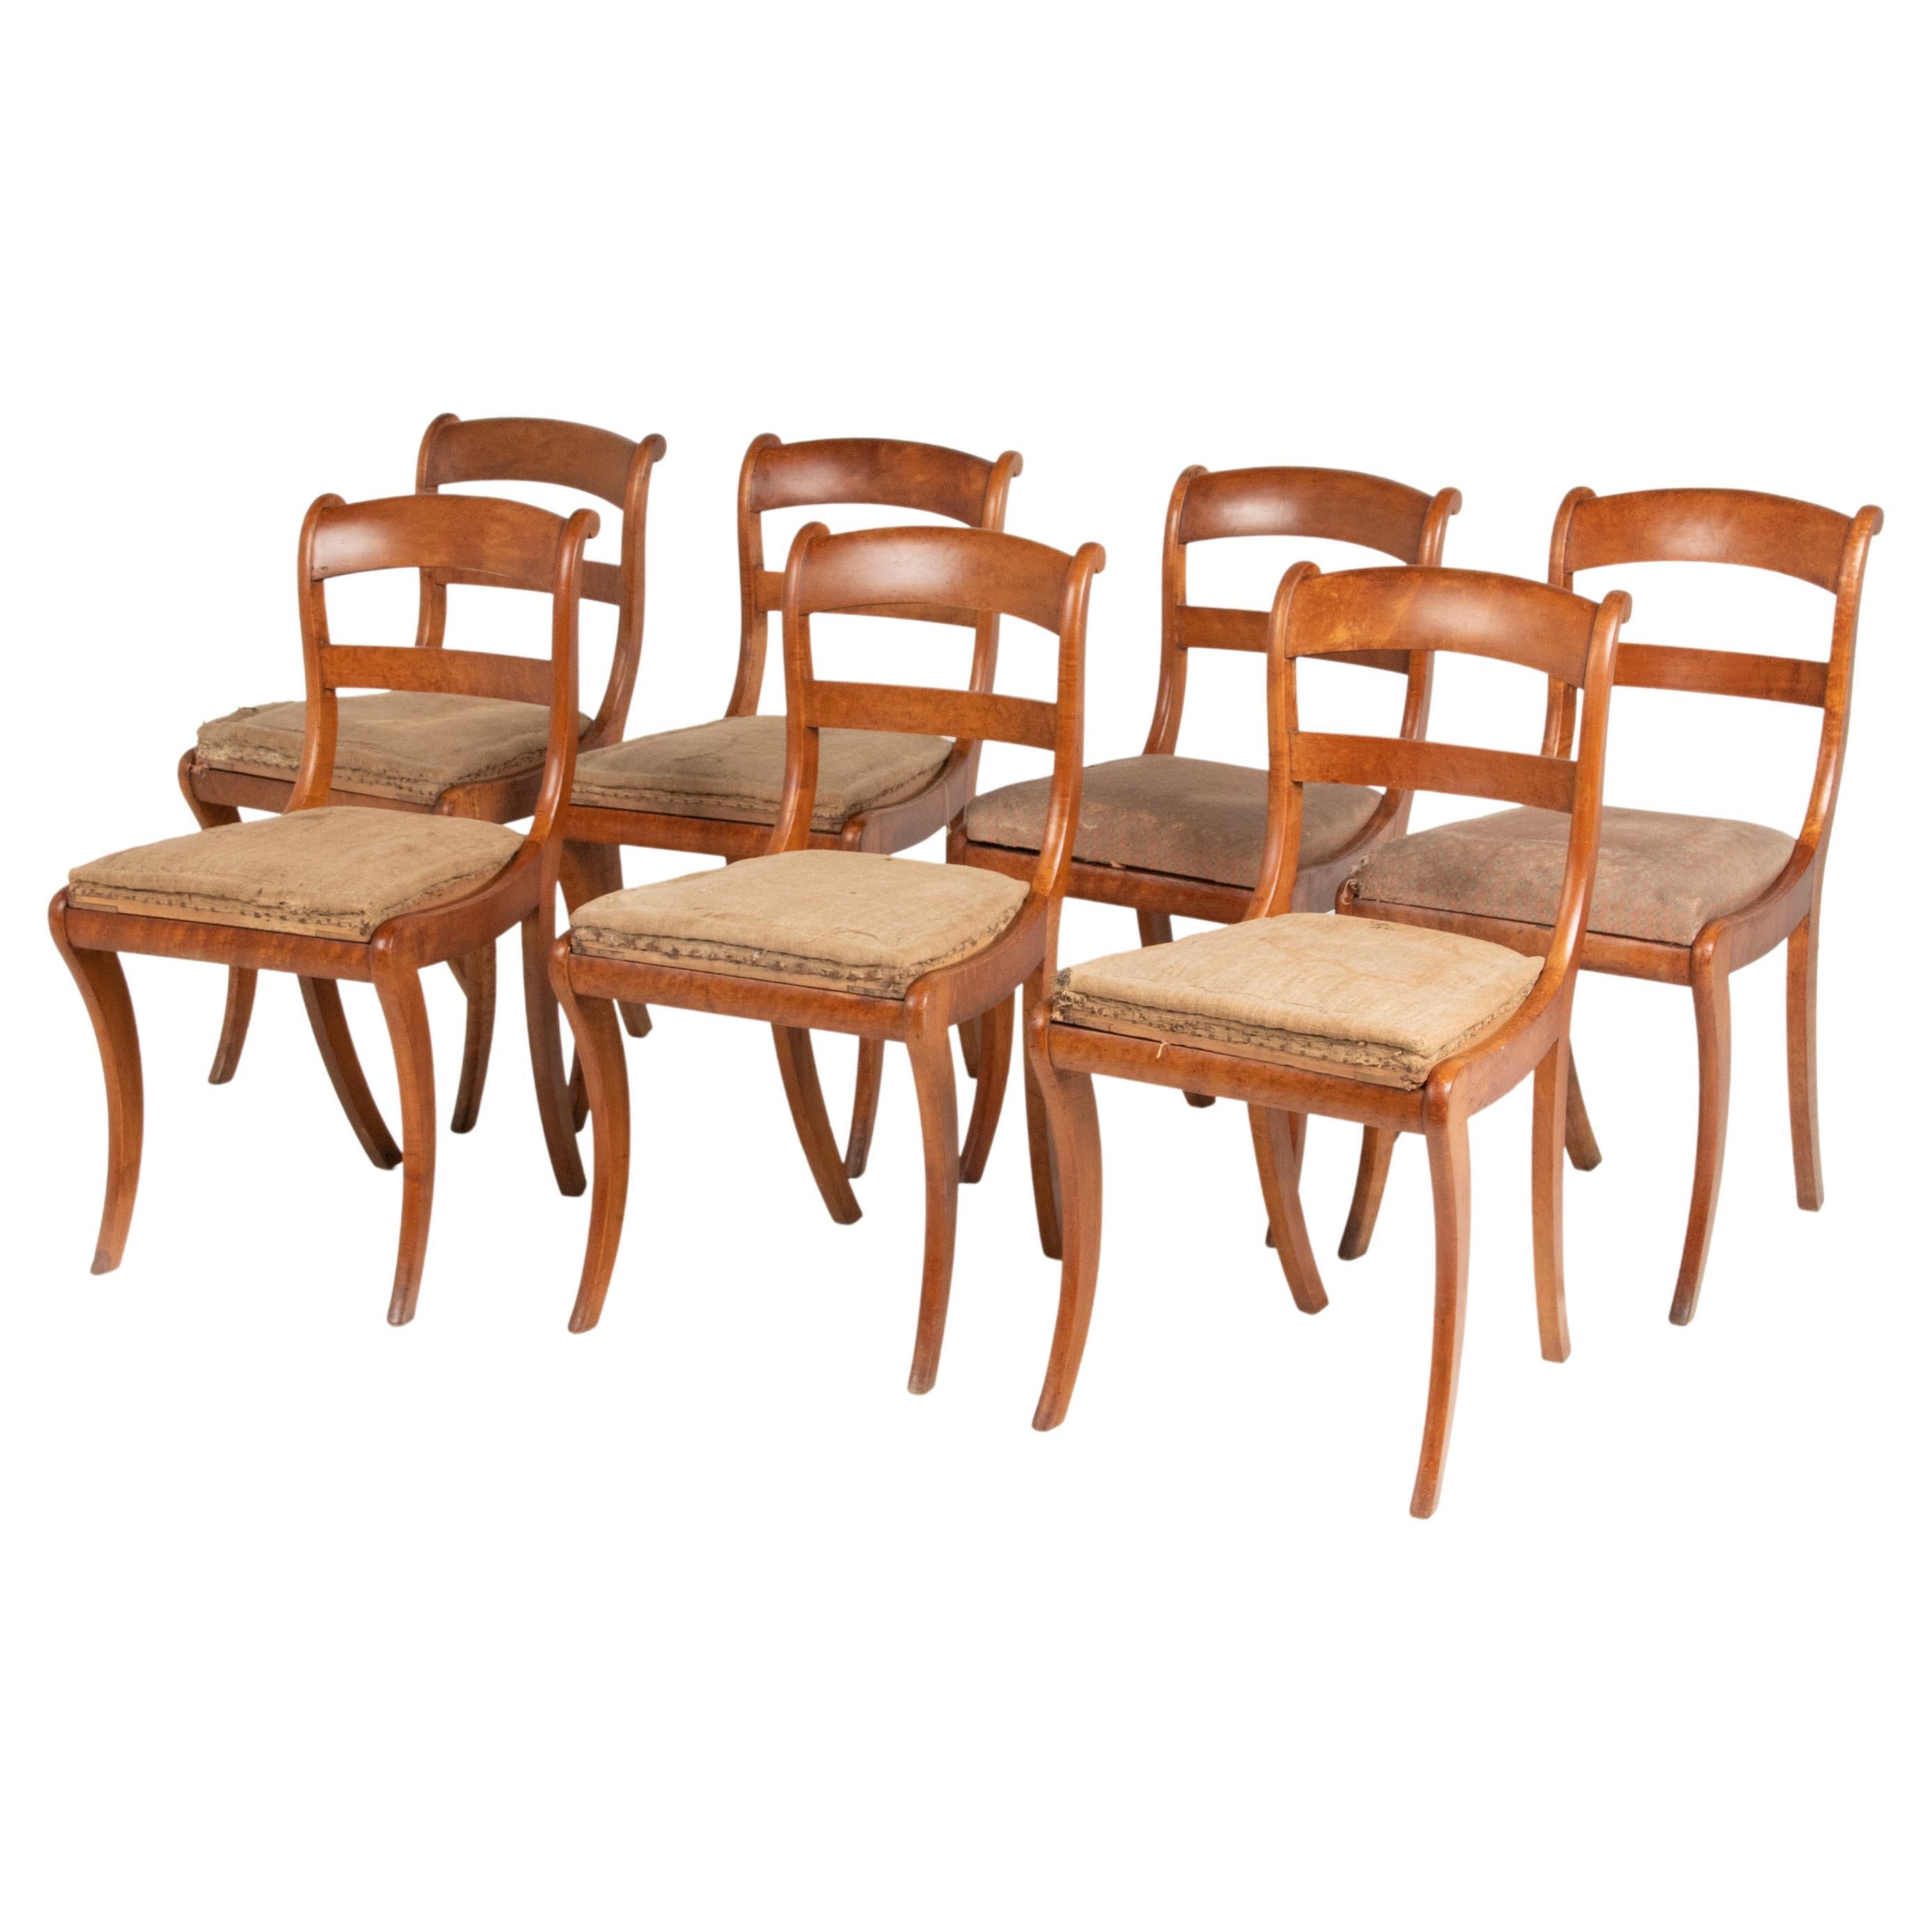 Early 19th Century Charles X Birds-Eye Maple Wood Dining Chairs For Sale